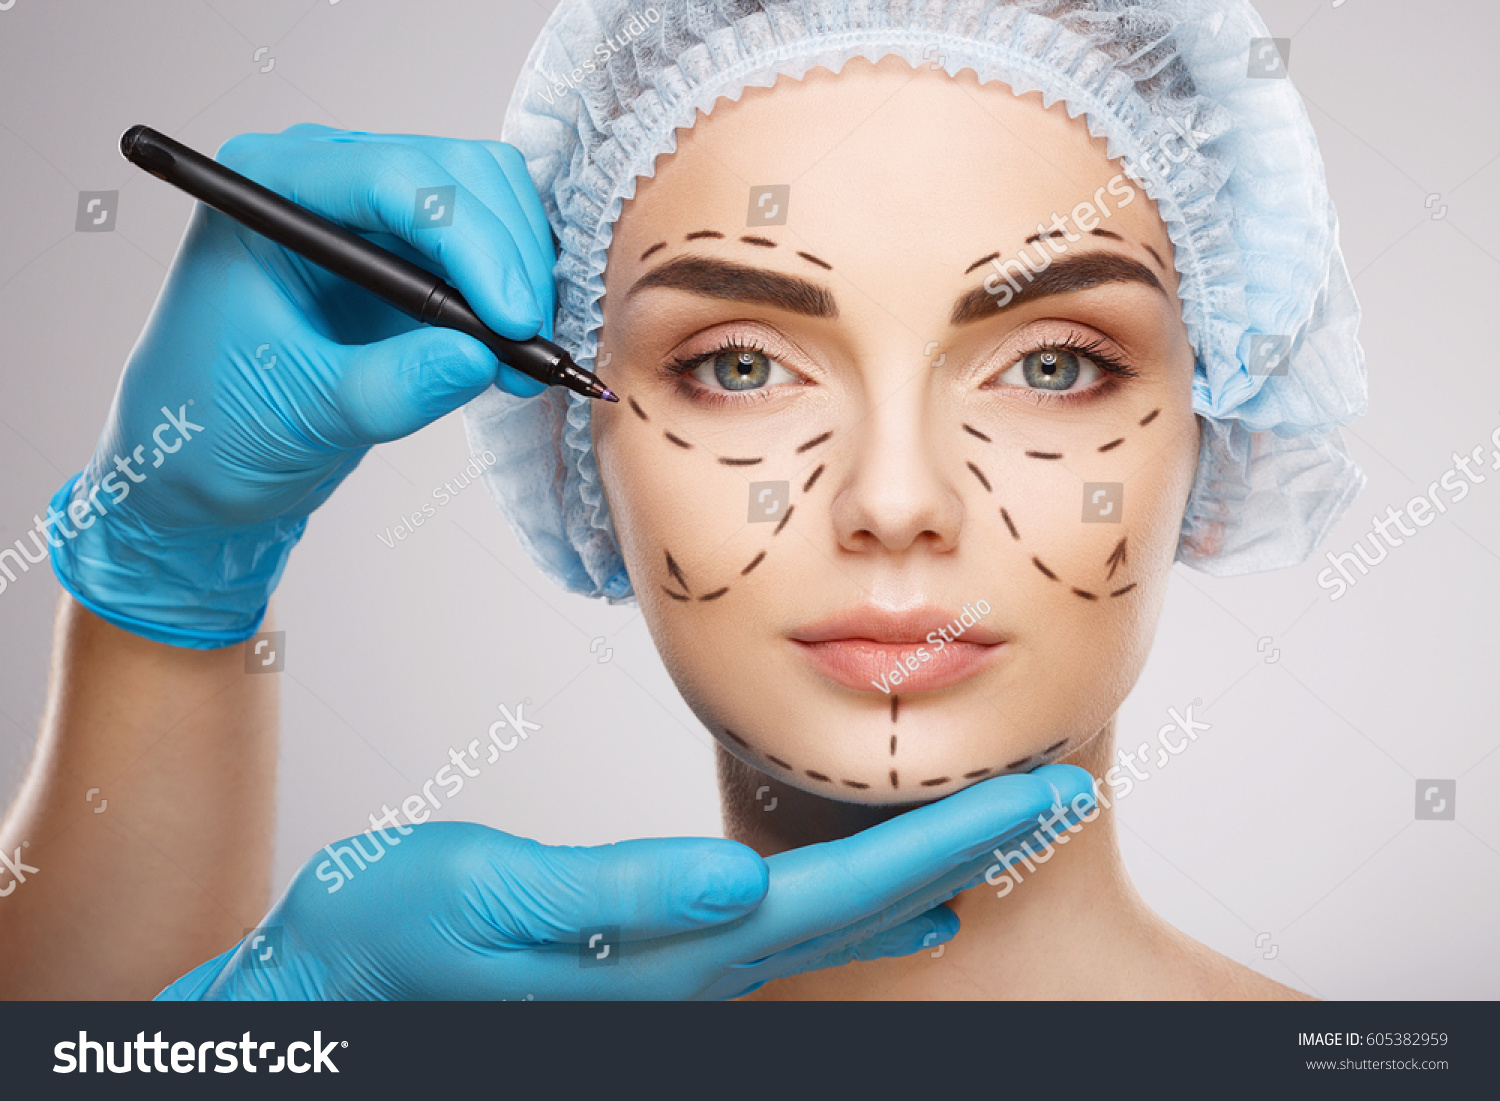 Pretty girl with dark eyebrows wearing blue medical hat at studio background, doctor's hands wearing blue gloves drawing perforation lines on face, plastic surgery concept. #605382959